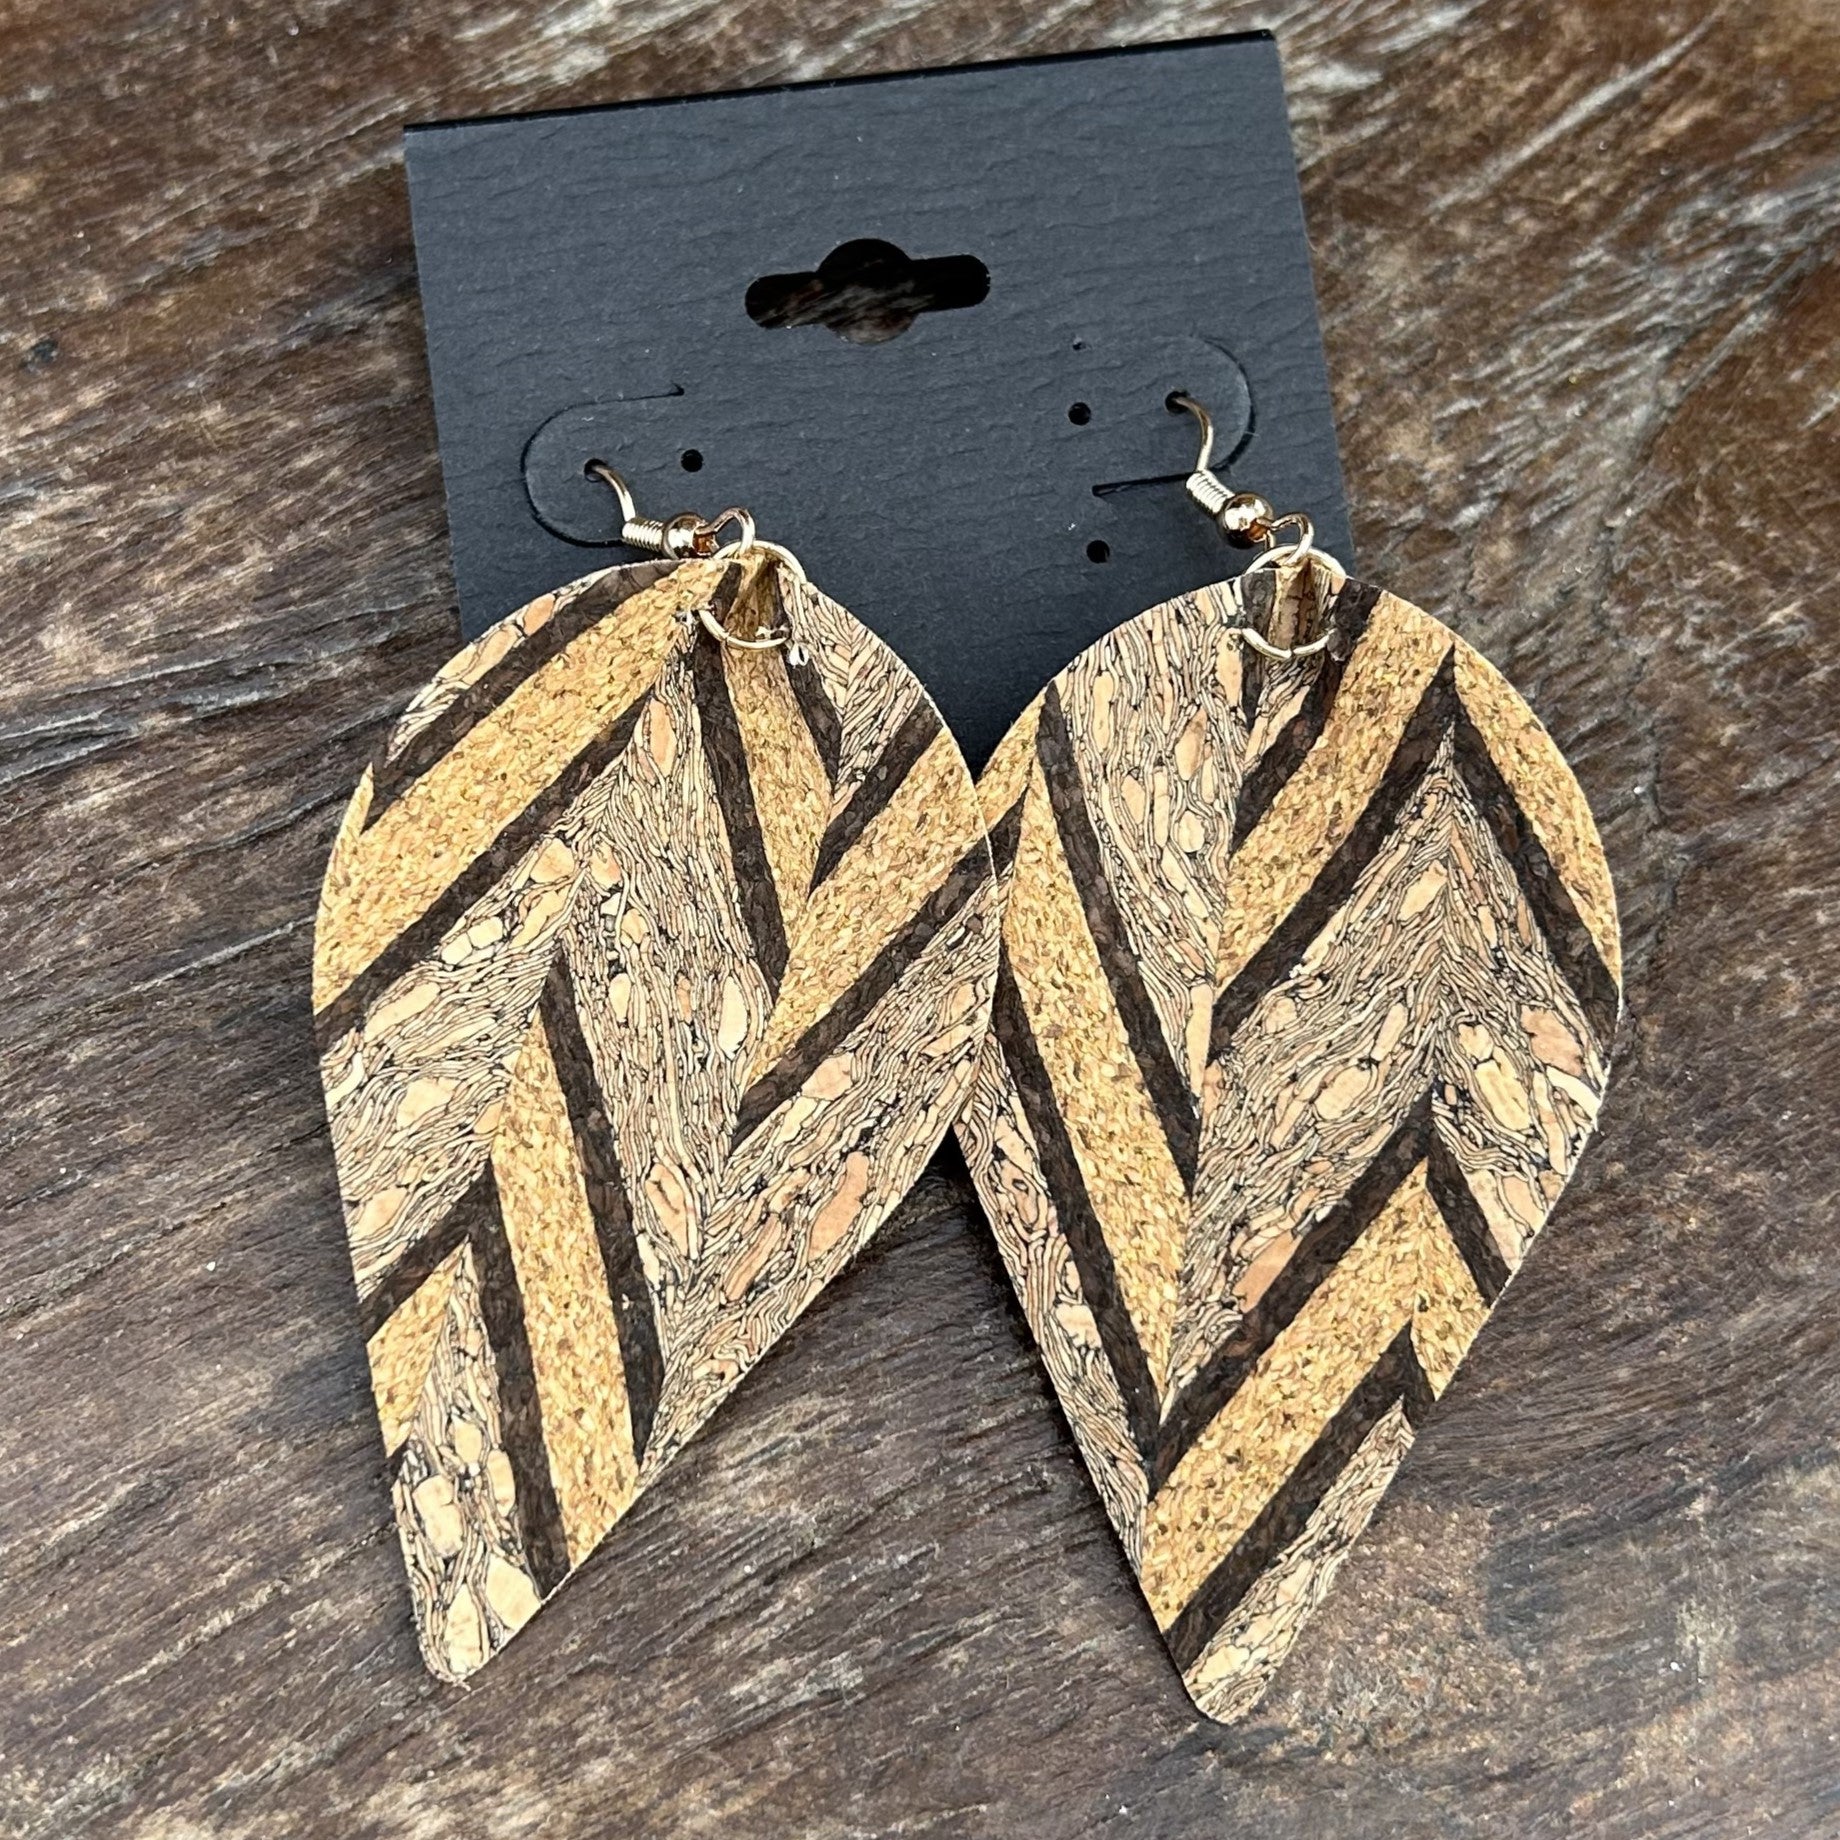 Get ready to love our Geometric Cork Earrings! These lightweight and boho-chic earrings are crafted in a leaf shape, making them fun and unique. Add a touch of creativity to your outfit and stand out with these statement earrings.